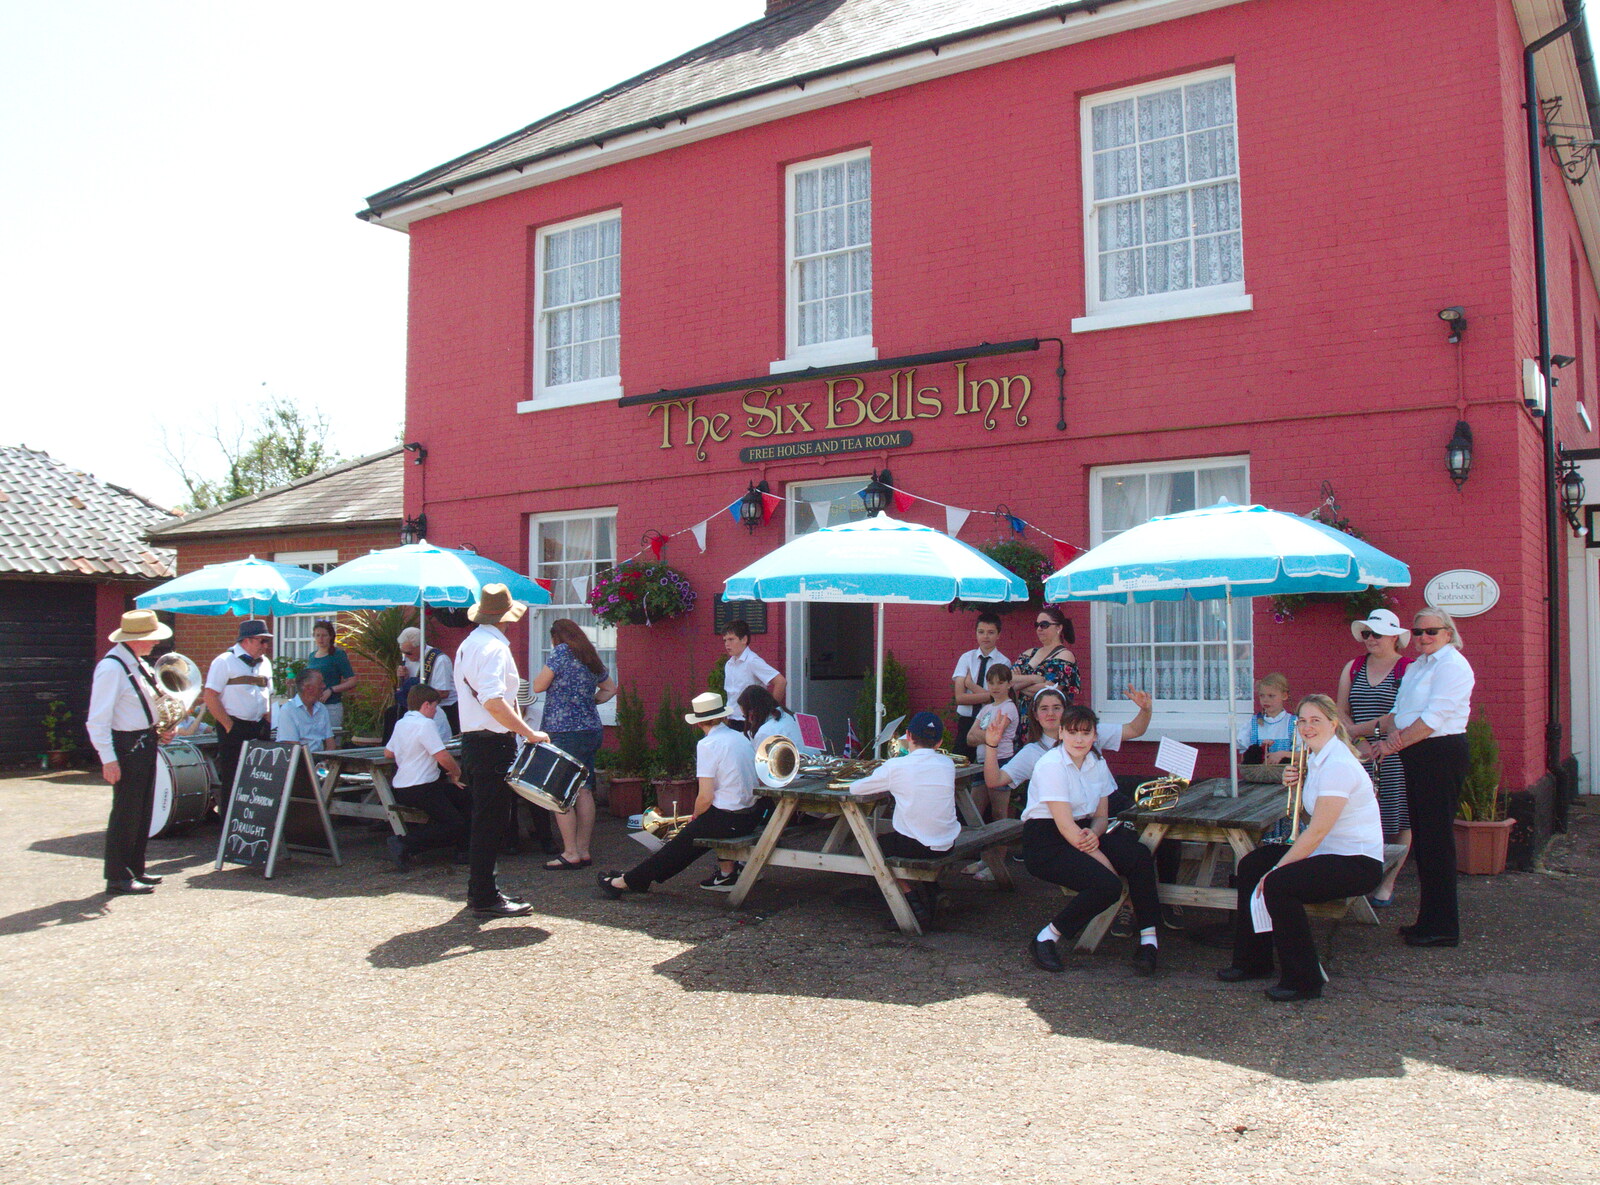 The GSB outside the Six Bells pub in Gislingham from GSB and the Gislingham Fete, Suffolk - 29th June 2019